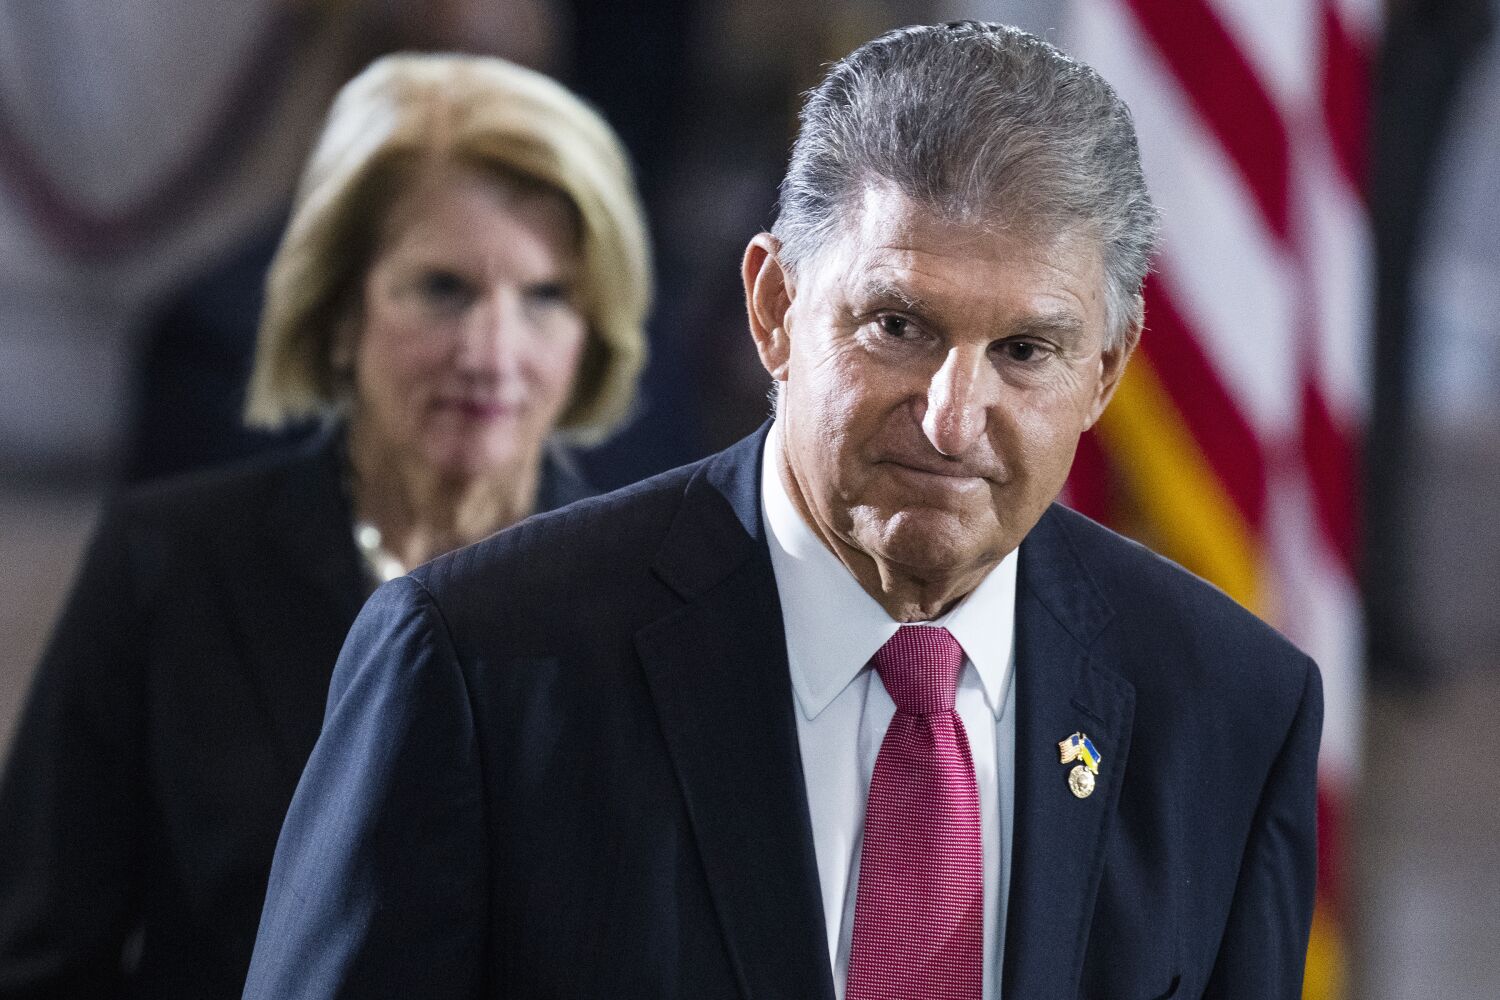 After bipartisan rebuff, Manchin abandons private legislative deal to help fossil fuel projects